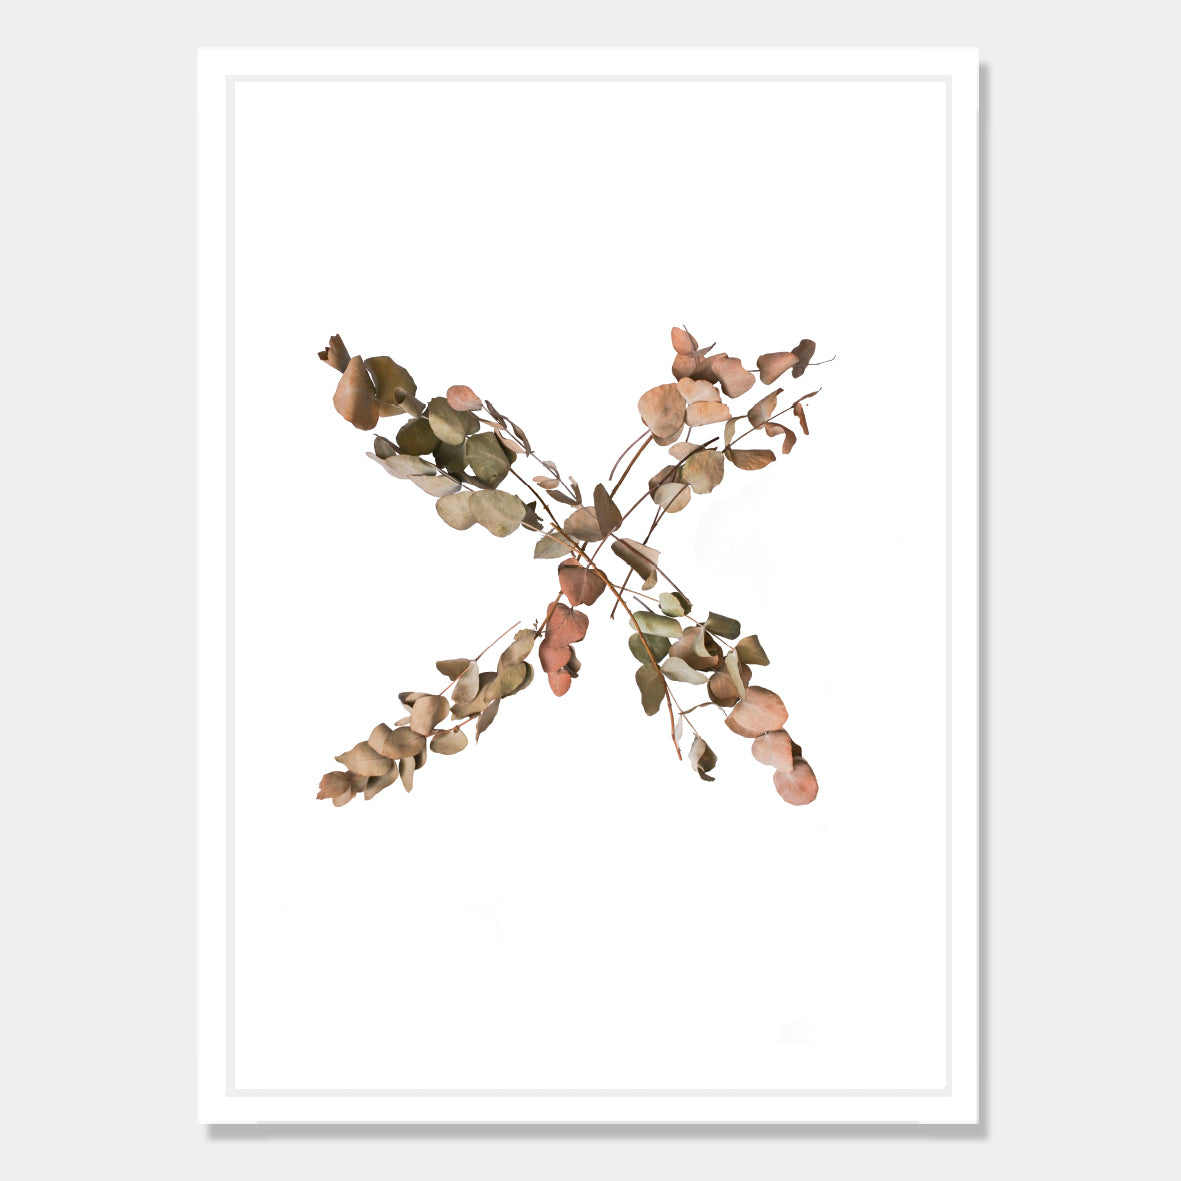 Photographic art print of dried leaves in a X shape by Bon Jung. Printed in New Zealand by endemicworld.Photographic art print of dried leaves in a X shape by Bon Jung. Printed in New Zealand by endemicworld and framed in white.